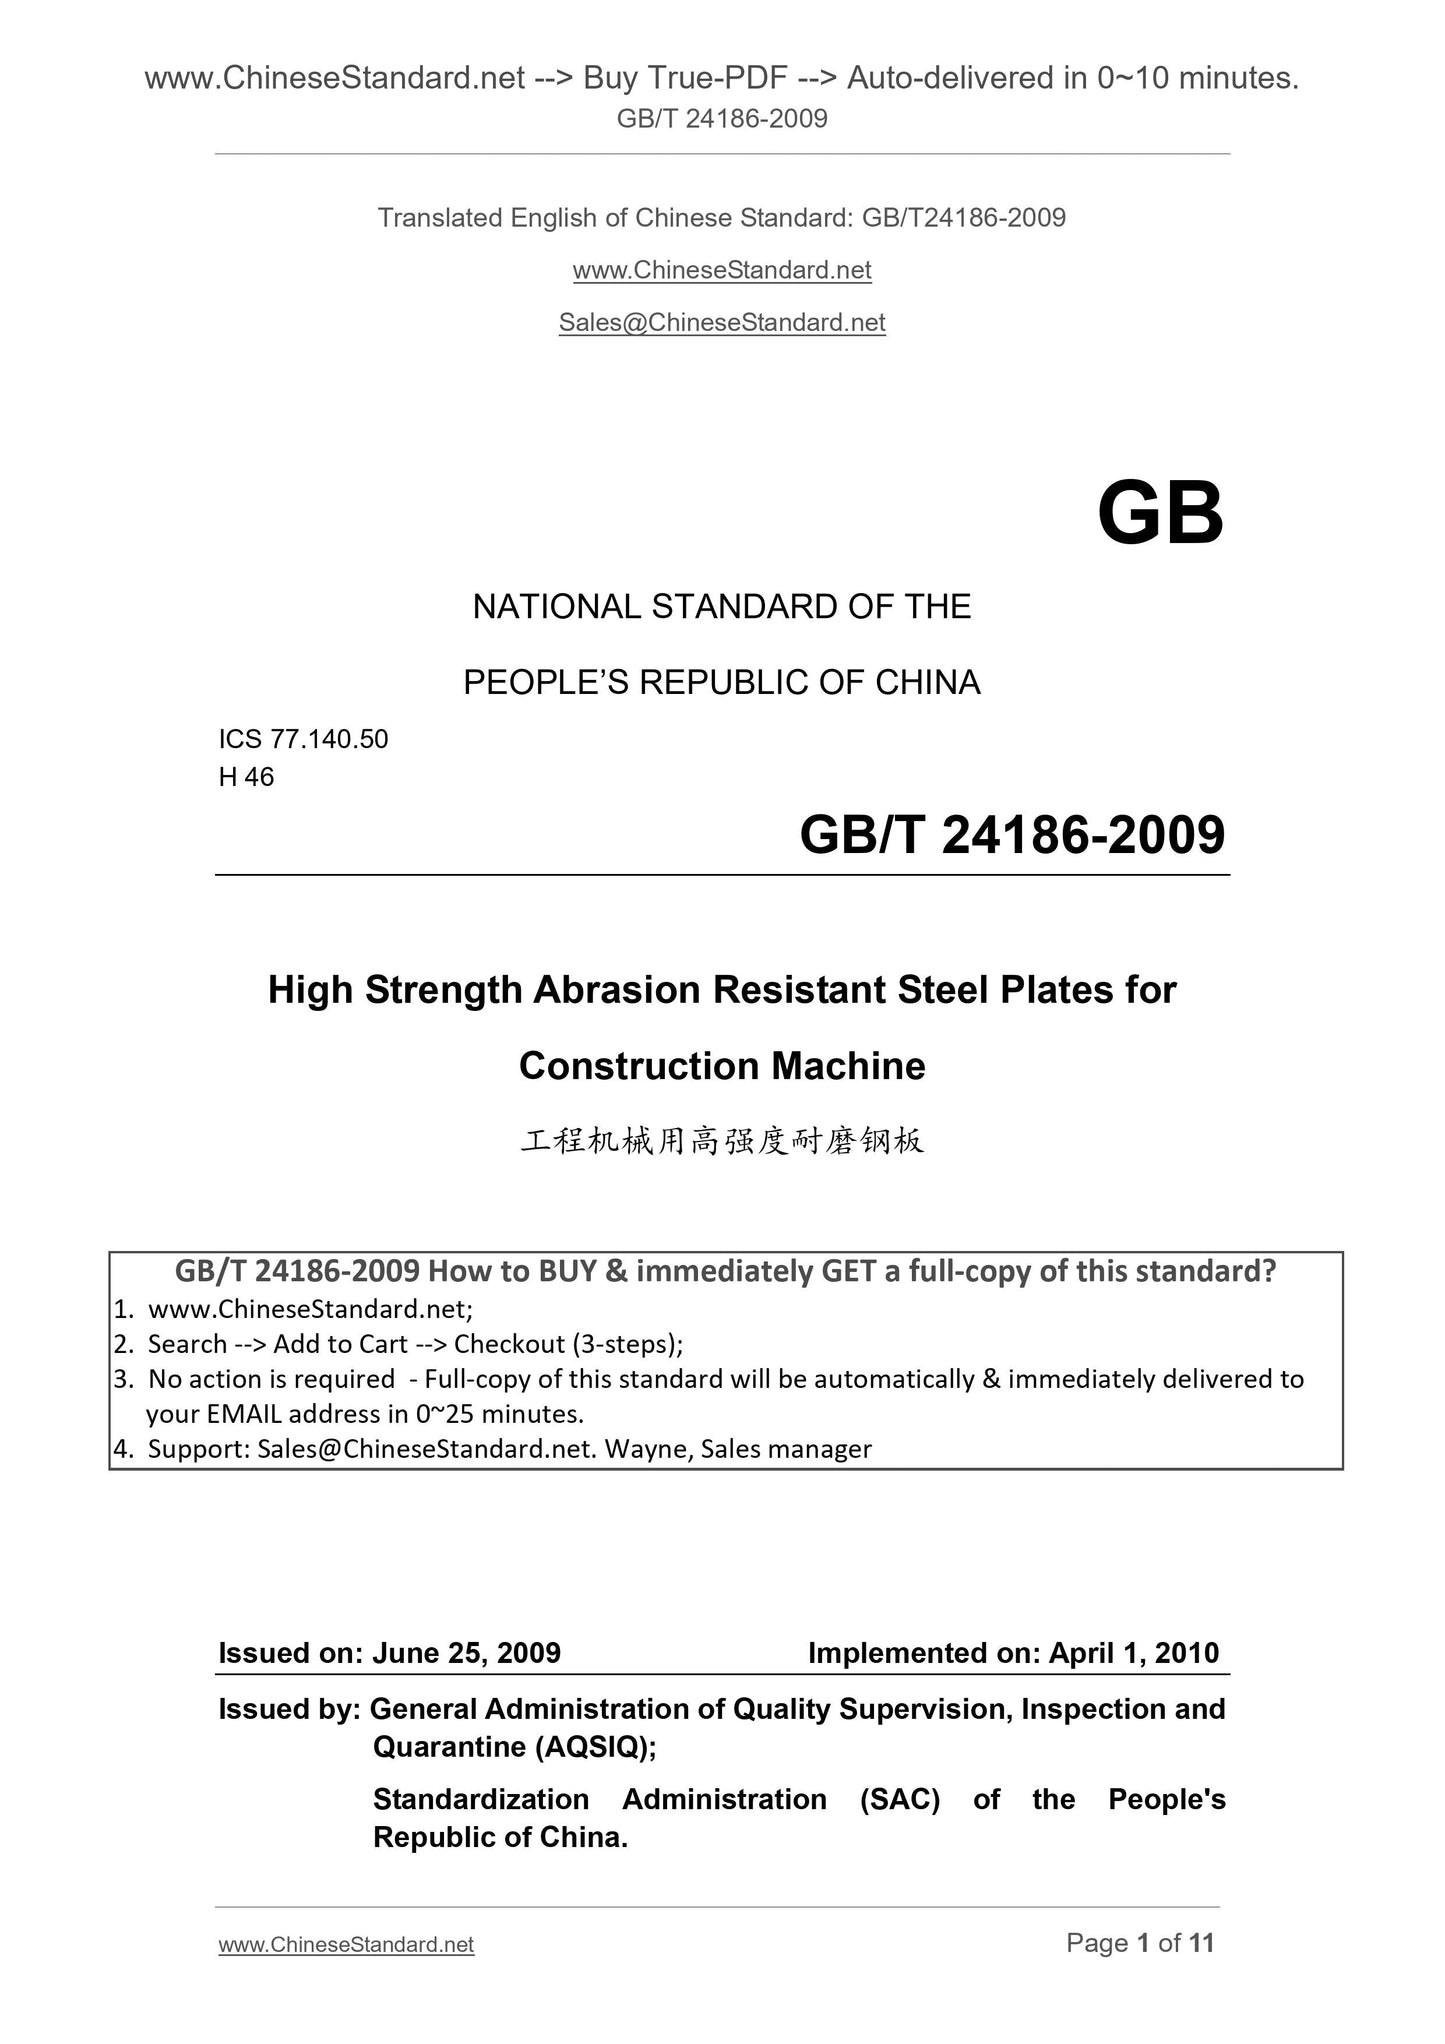 GB/T 24186-2009 Page 1